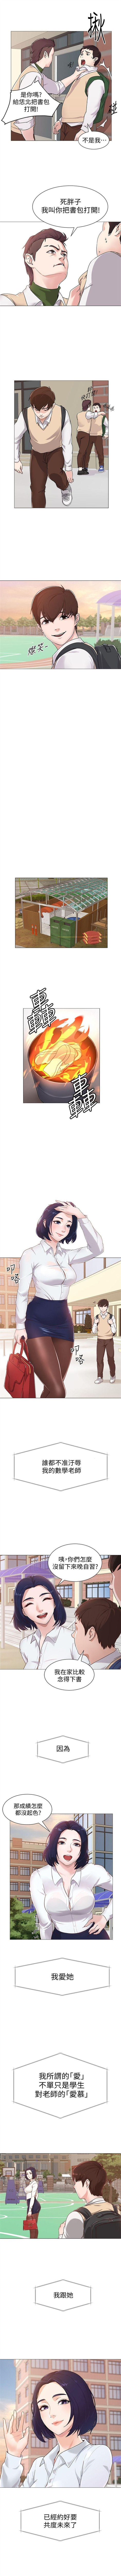 Pure18 老師 1-88 官方中文（連載中） Lady - Page 6